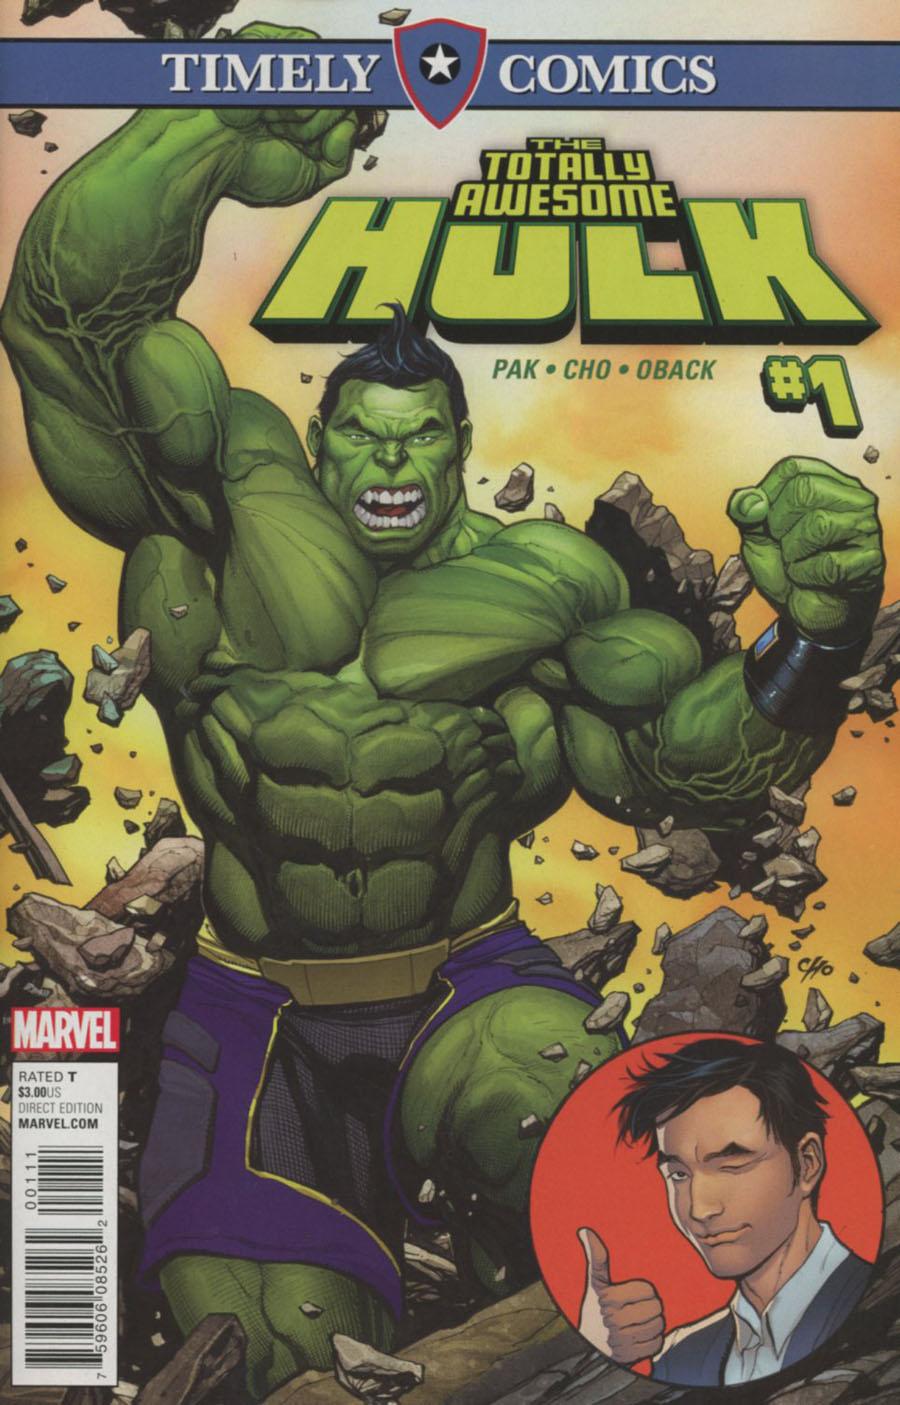 Timely Comics Totally Awesome Hulk Vol. 1 #1